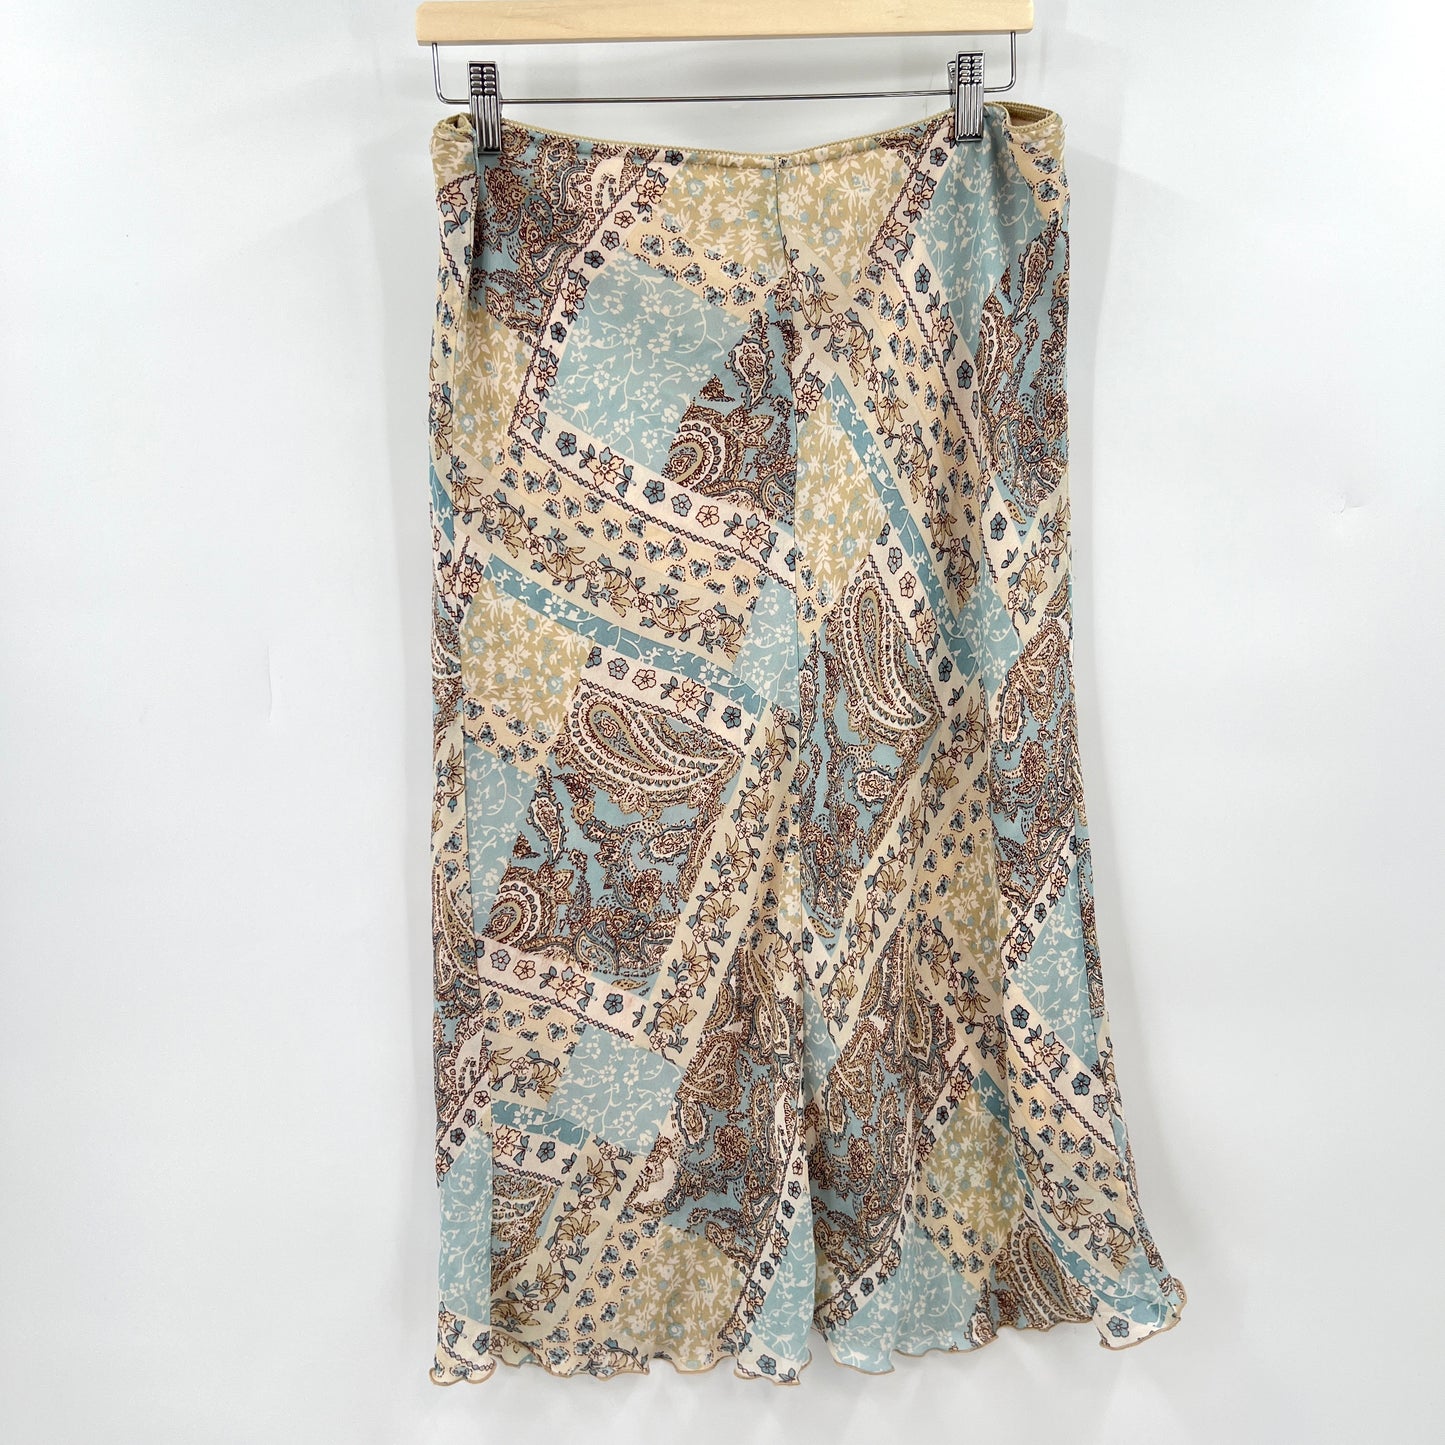 SOLD. Y2K Paisley Patch Like Skirt M/L